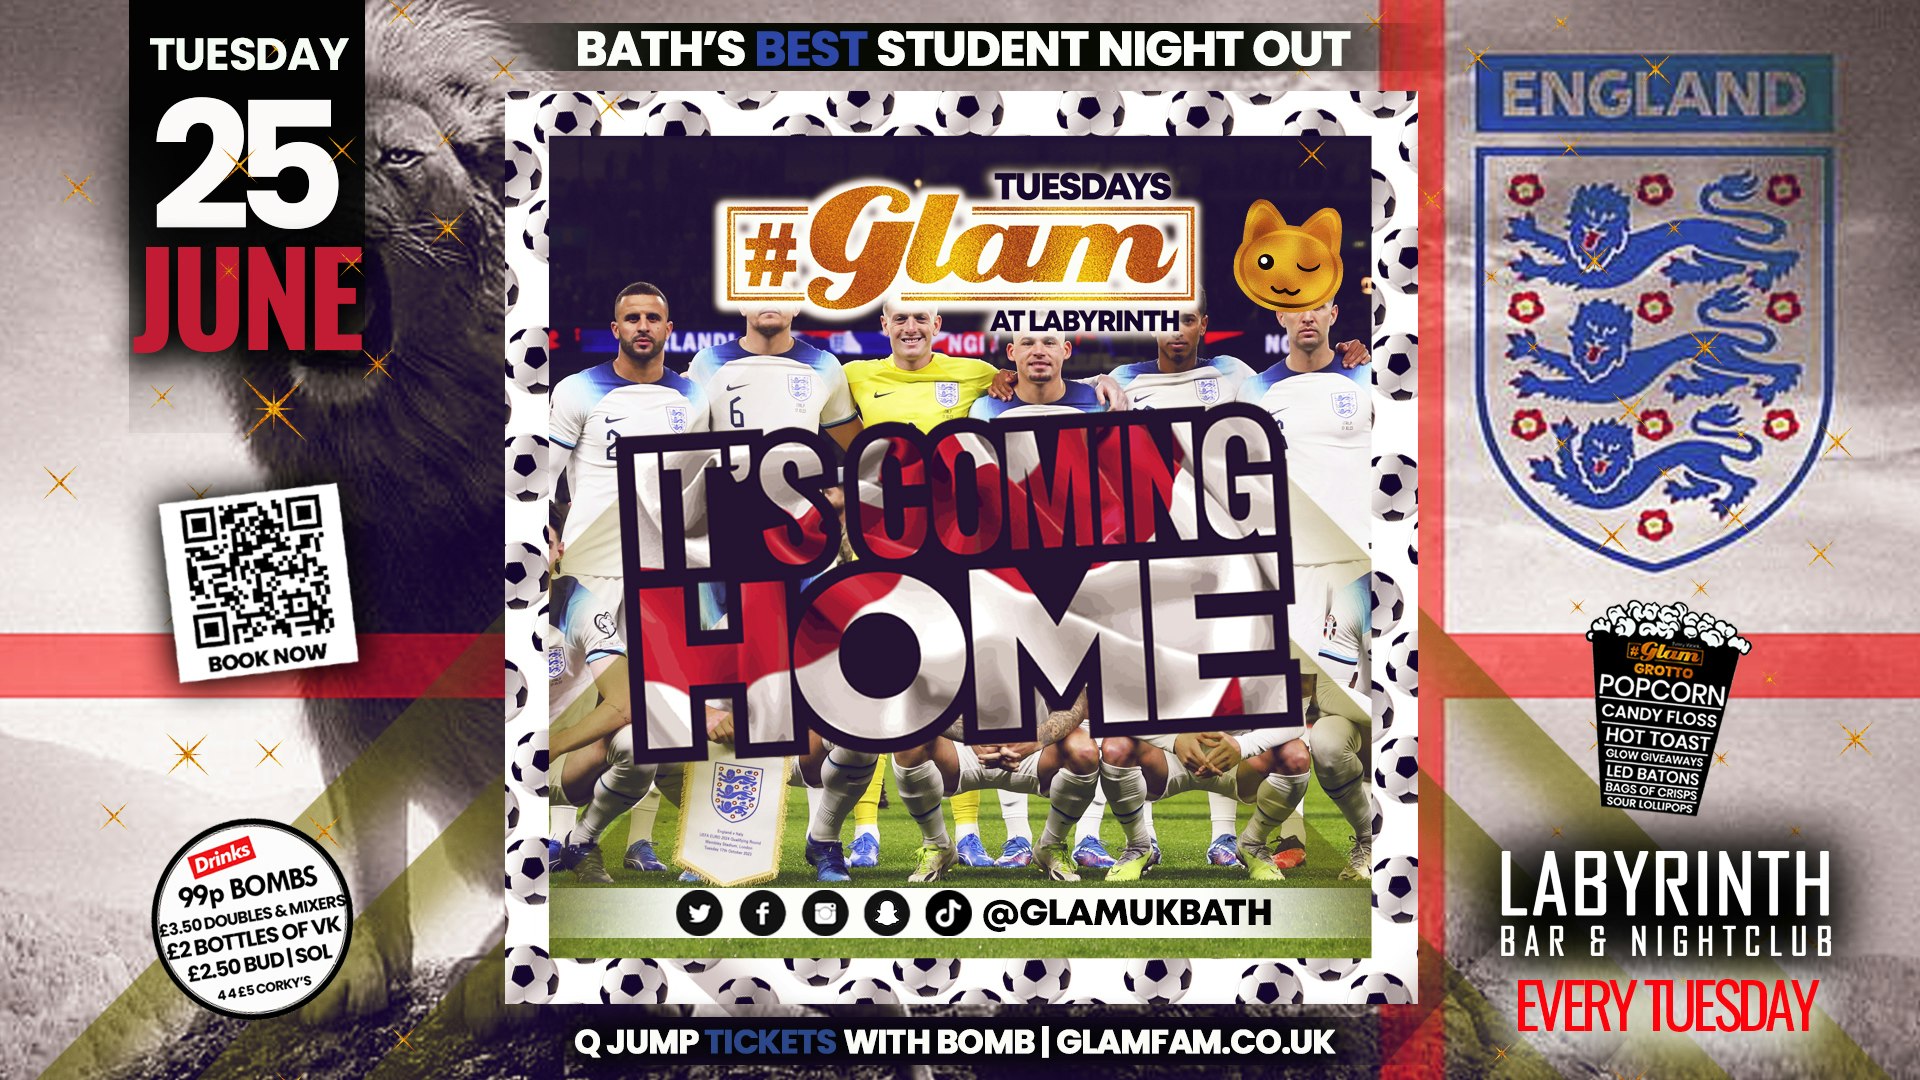 Glam – THREE LIONS PARTY! 🦁🦁🦁 Bath’s Biggest Week Night | Tuesdays at Labs 😻